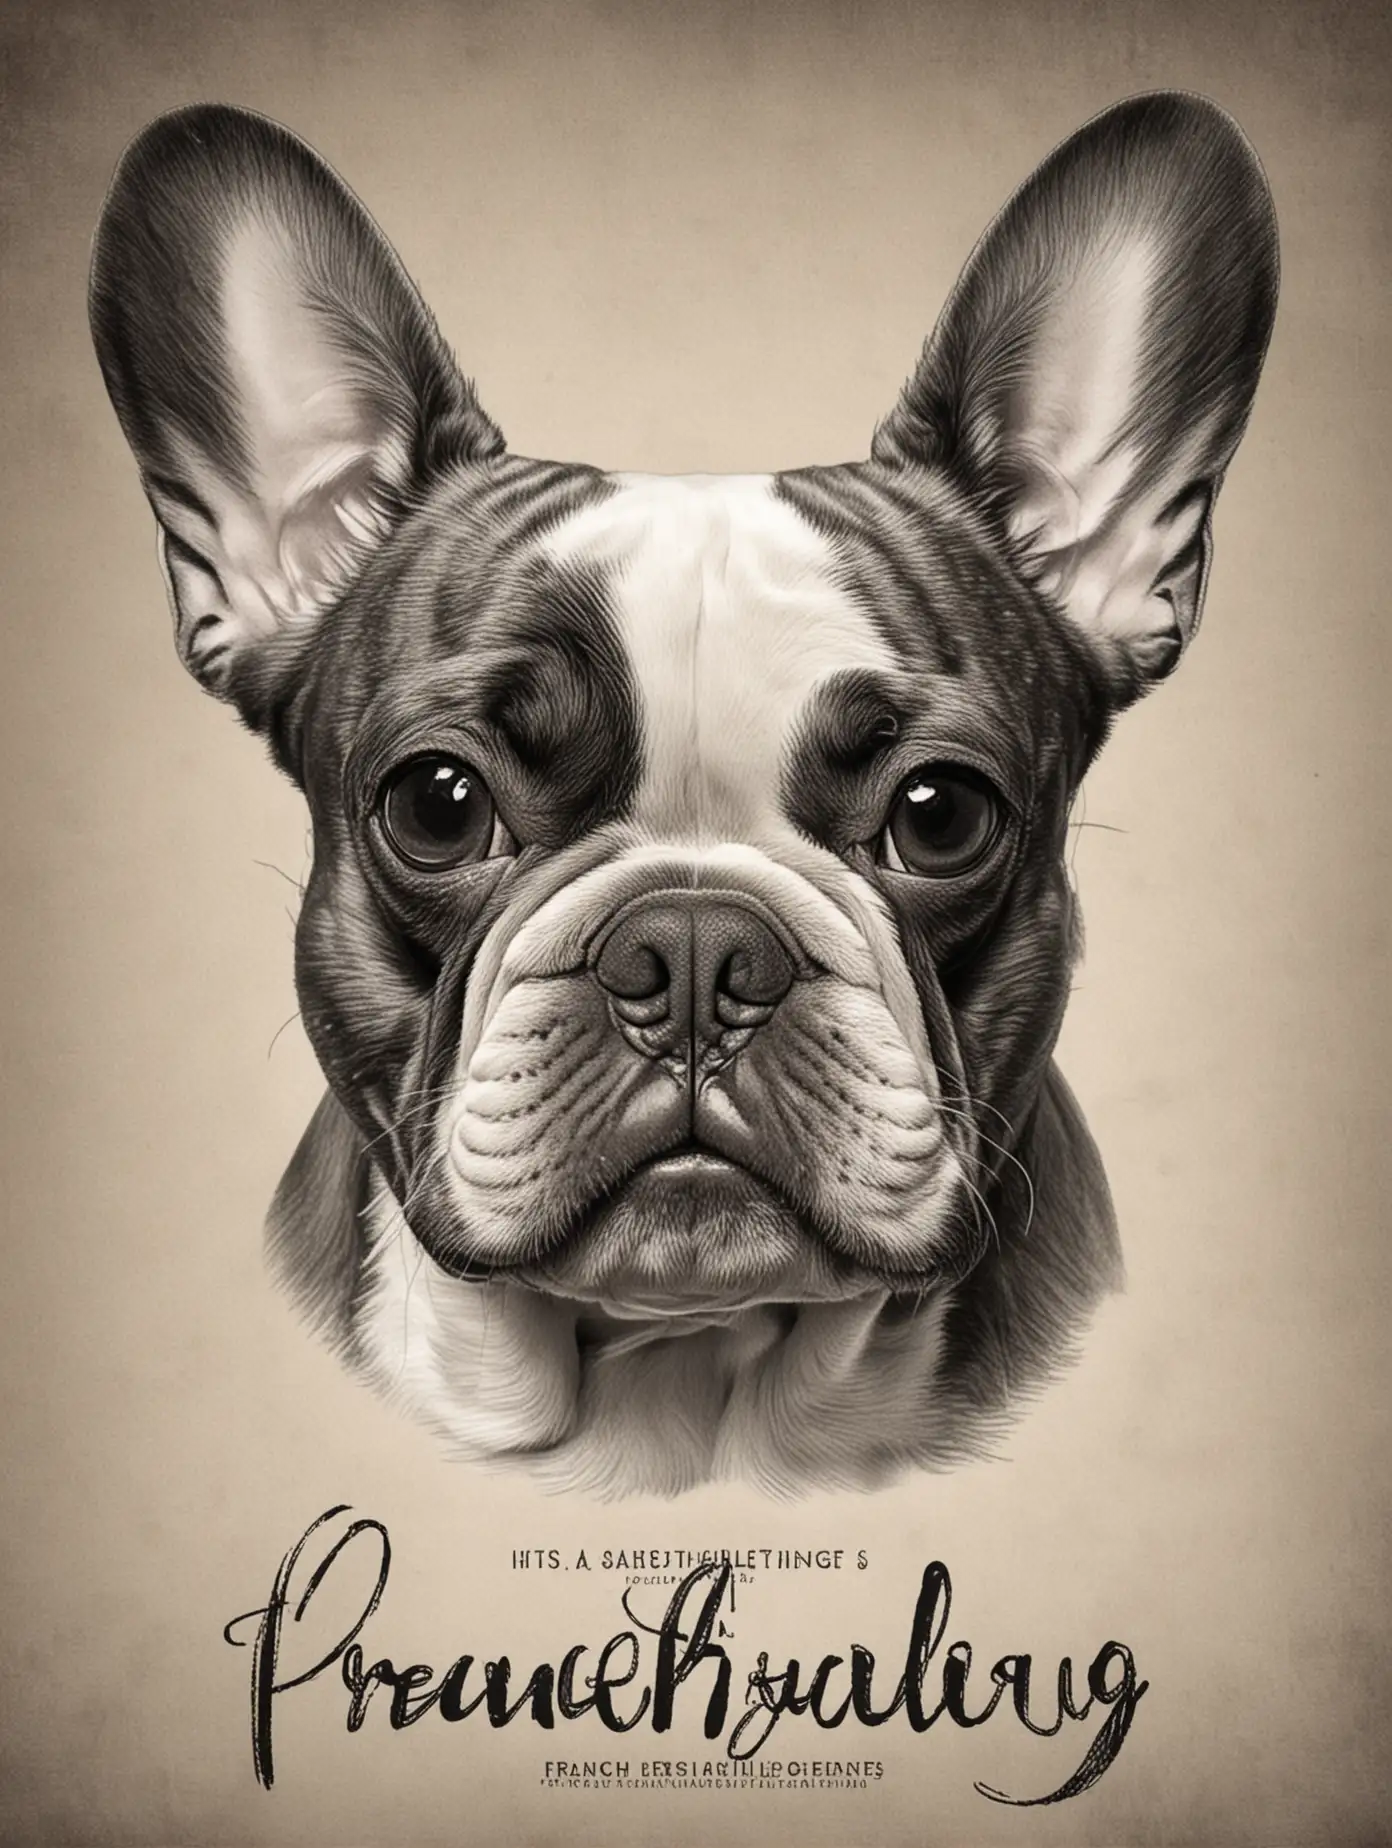 black and white illustration of a French Bulldog’s face and front paws. The text “French Bulldog” is written below the image. It’s a simple yet expressive depiction of this adorable dog breed.